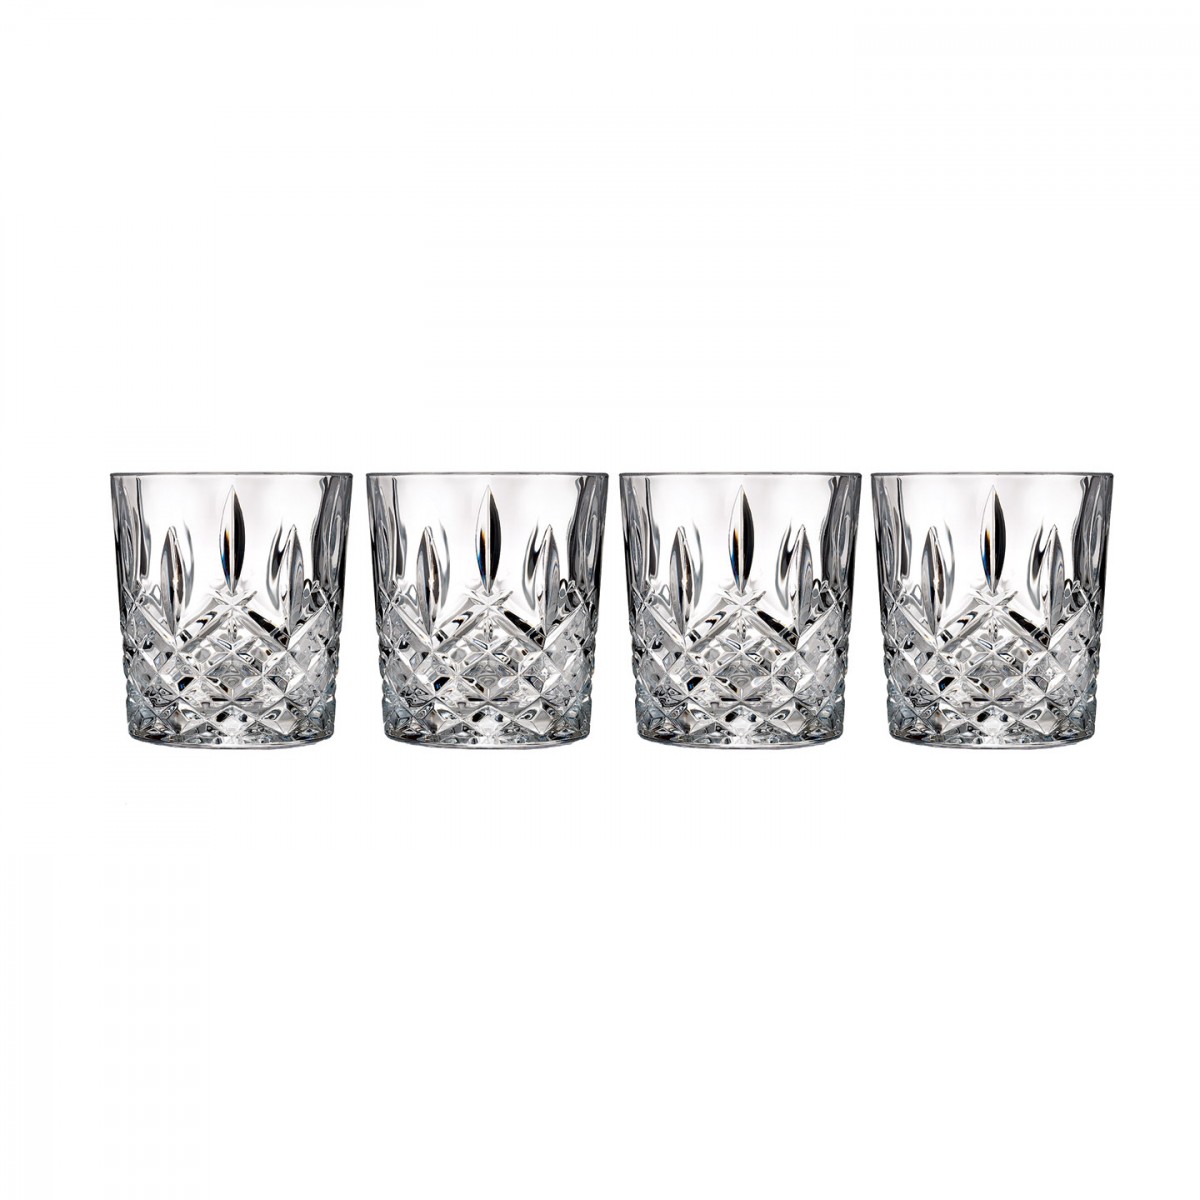 Marquis by Waterford, On Sale, Free Shipping | Crystal Classics